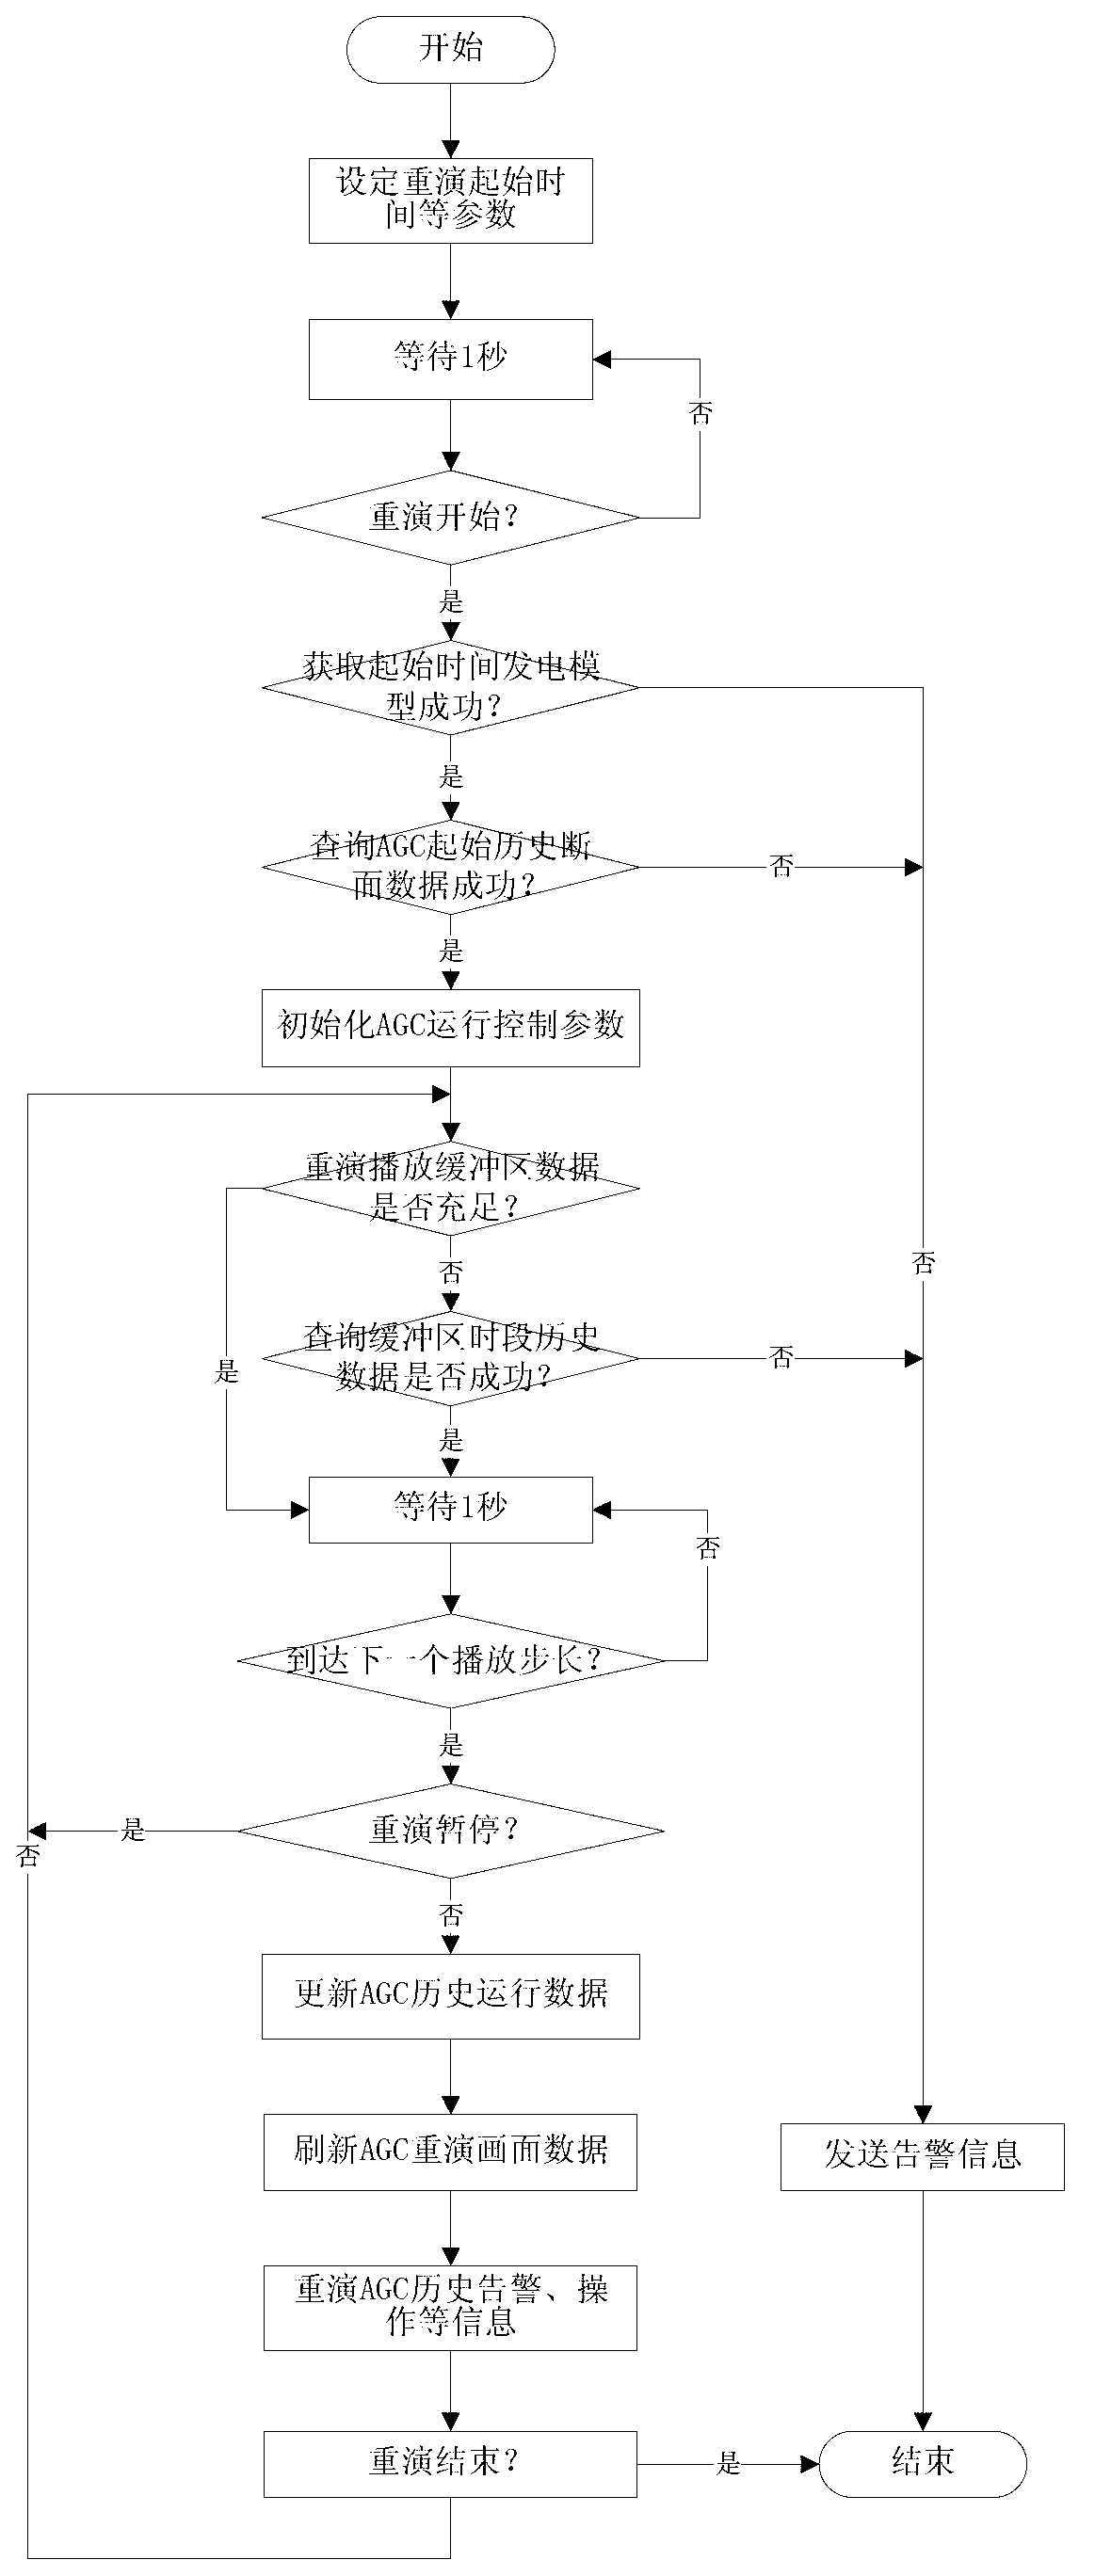 Repeating and simulating method for automatic generation control of power grid